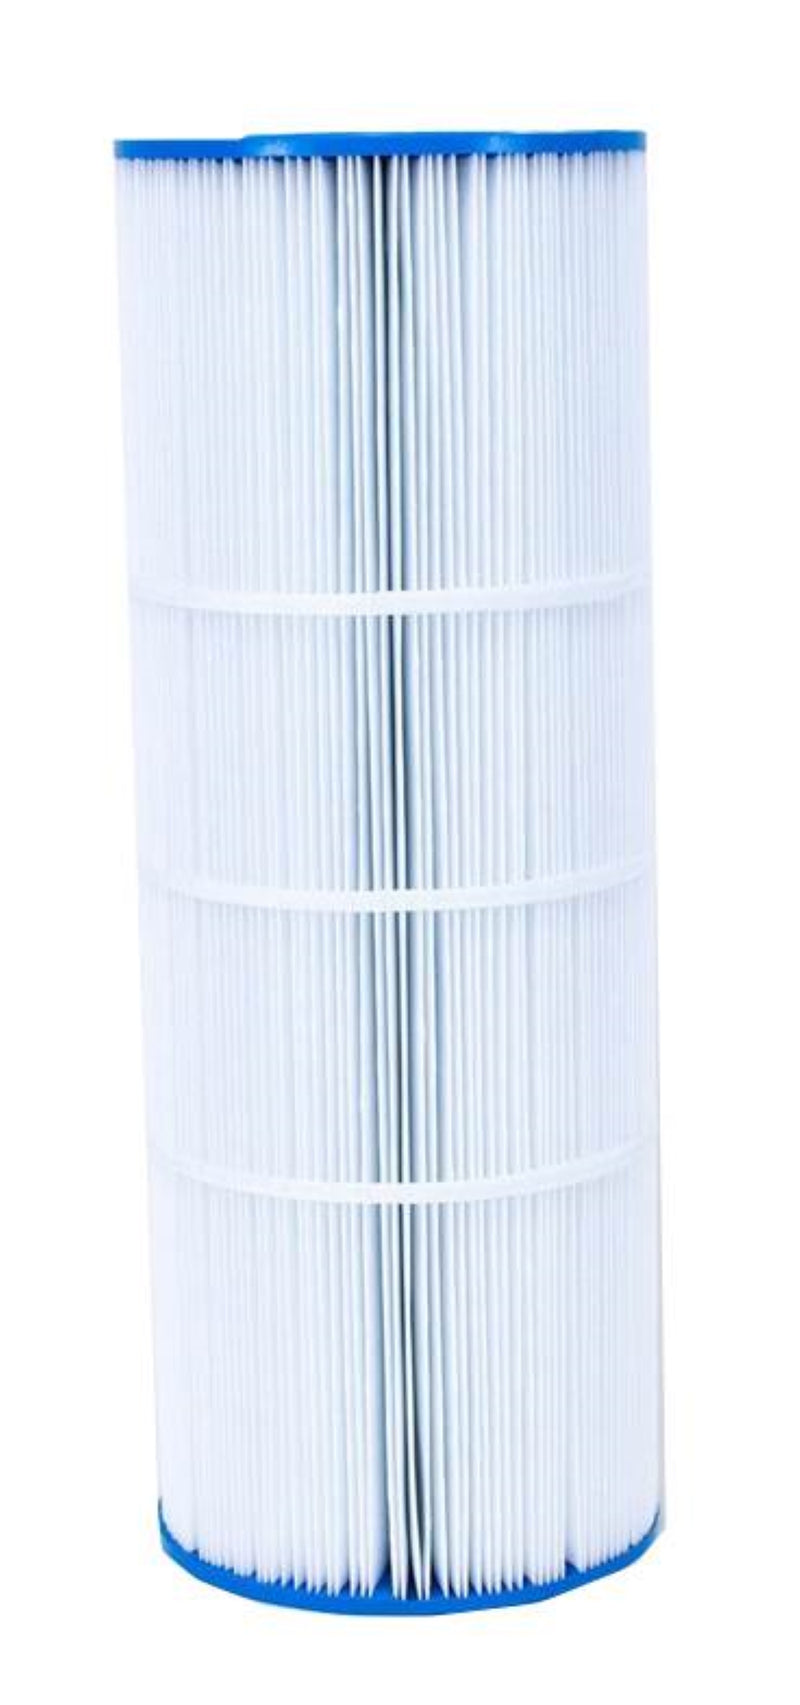 Unicel C-7699 Replacement Above Ground Swimming Pool Filter Cartridge,142 Pleats